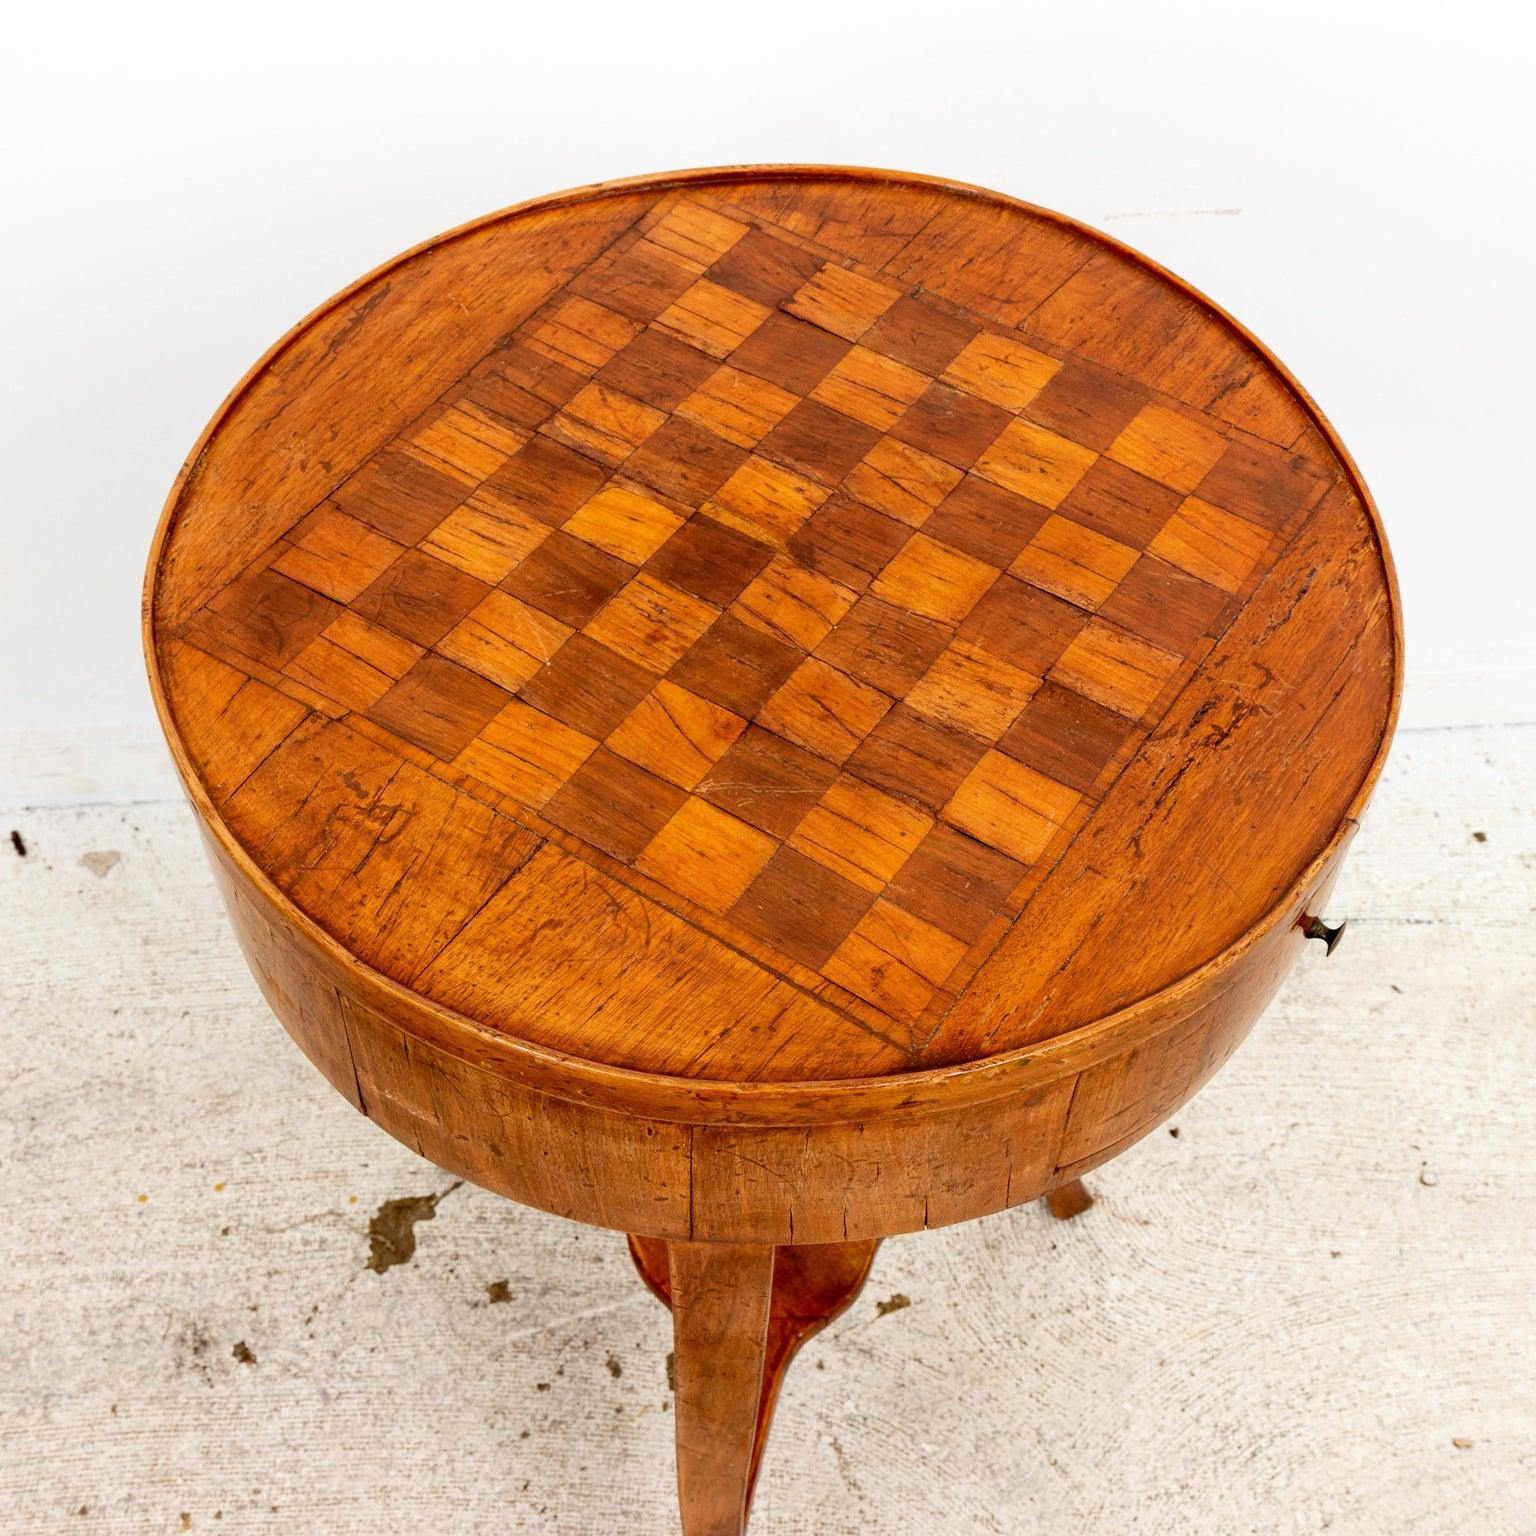 Round Italian game table, with one drawer resting on three square tapered legs. Wear consistent with age.